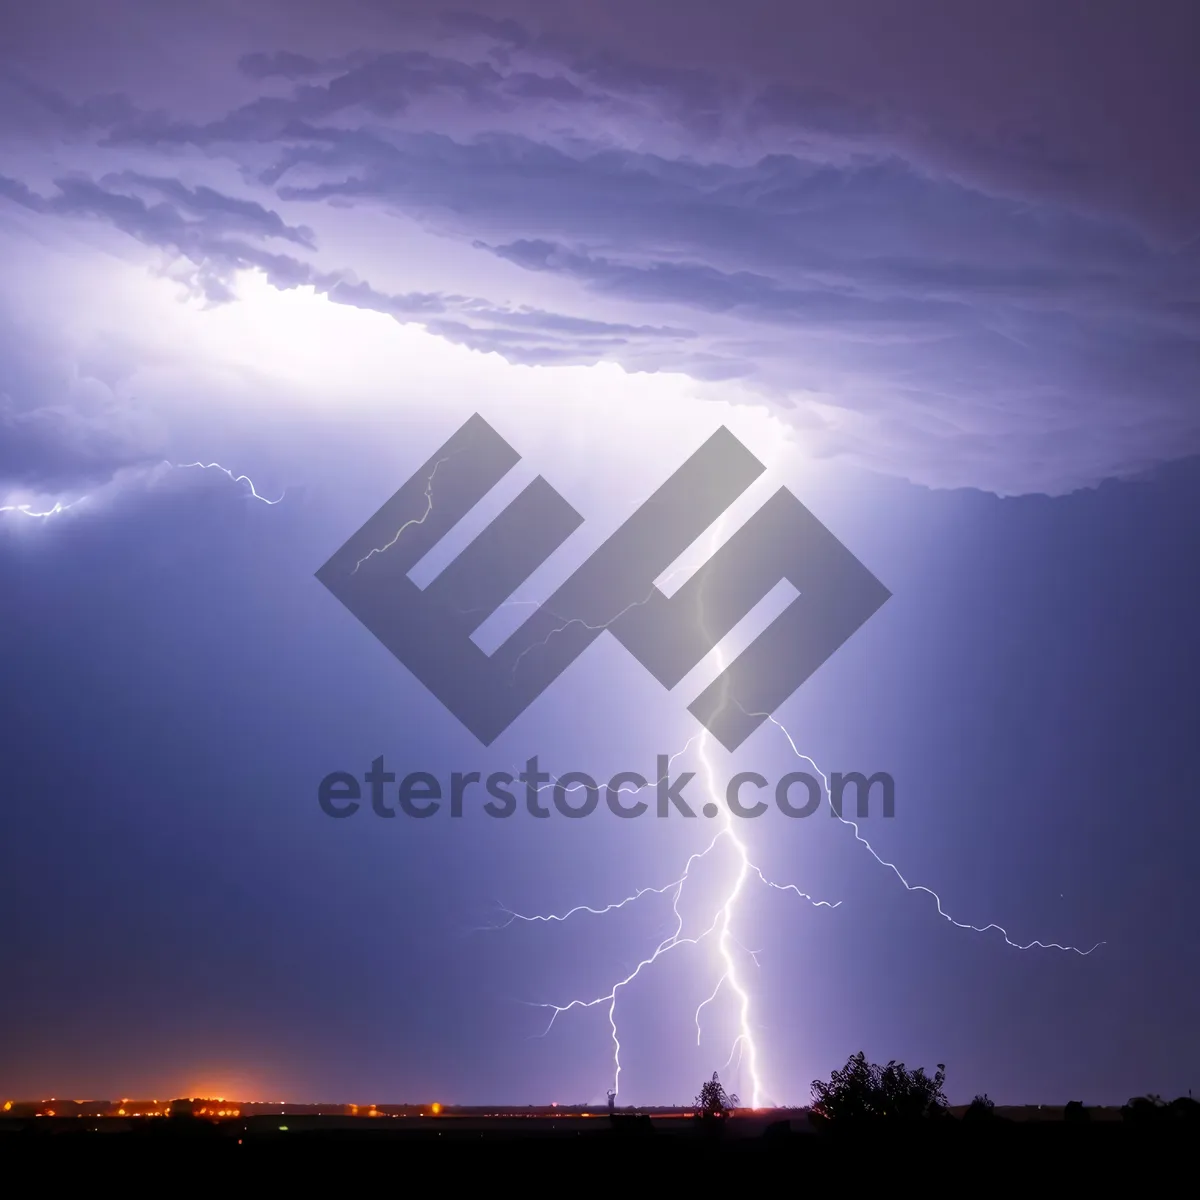 Picture of Electric Sunset: Lightning Bolts Illuminate Dramatic Sky